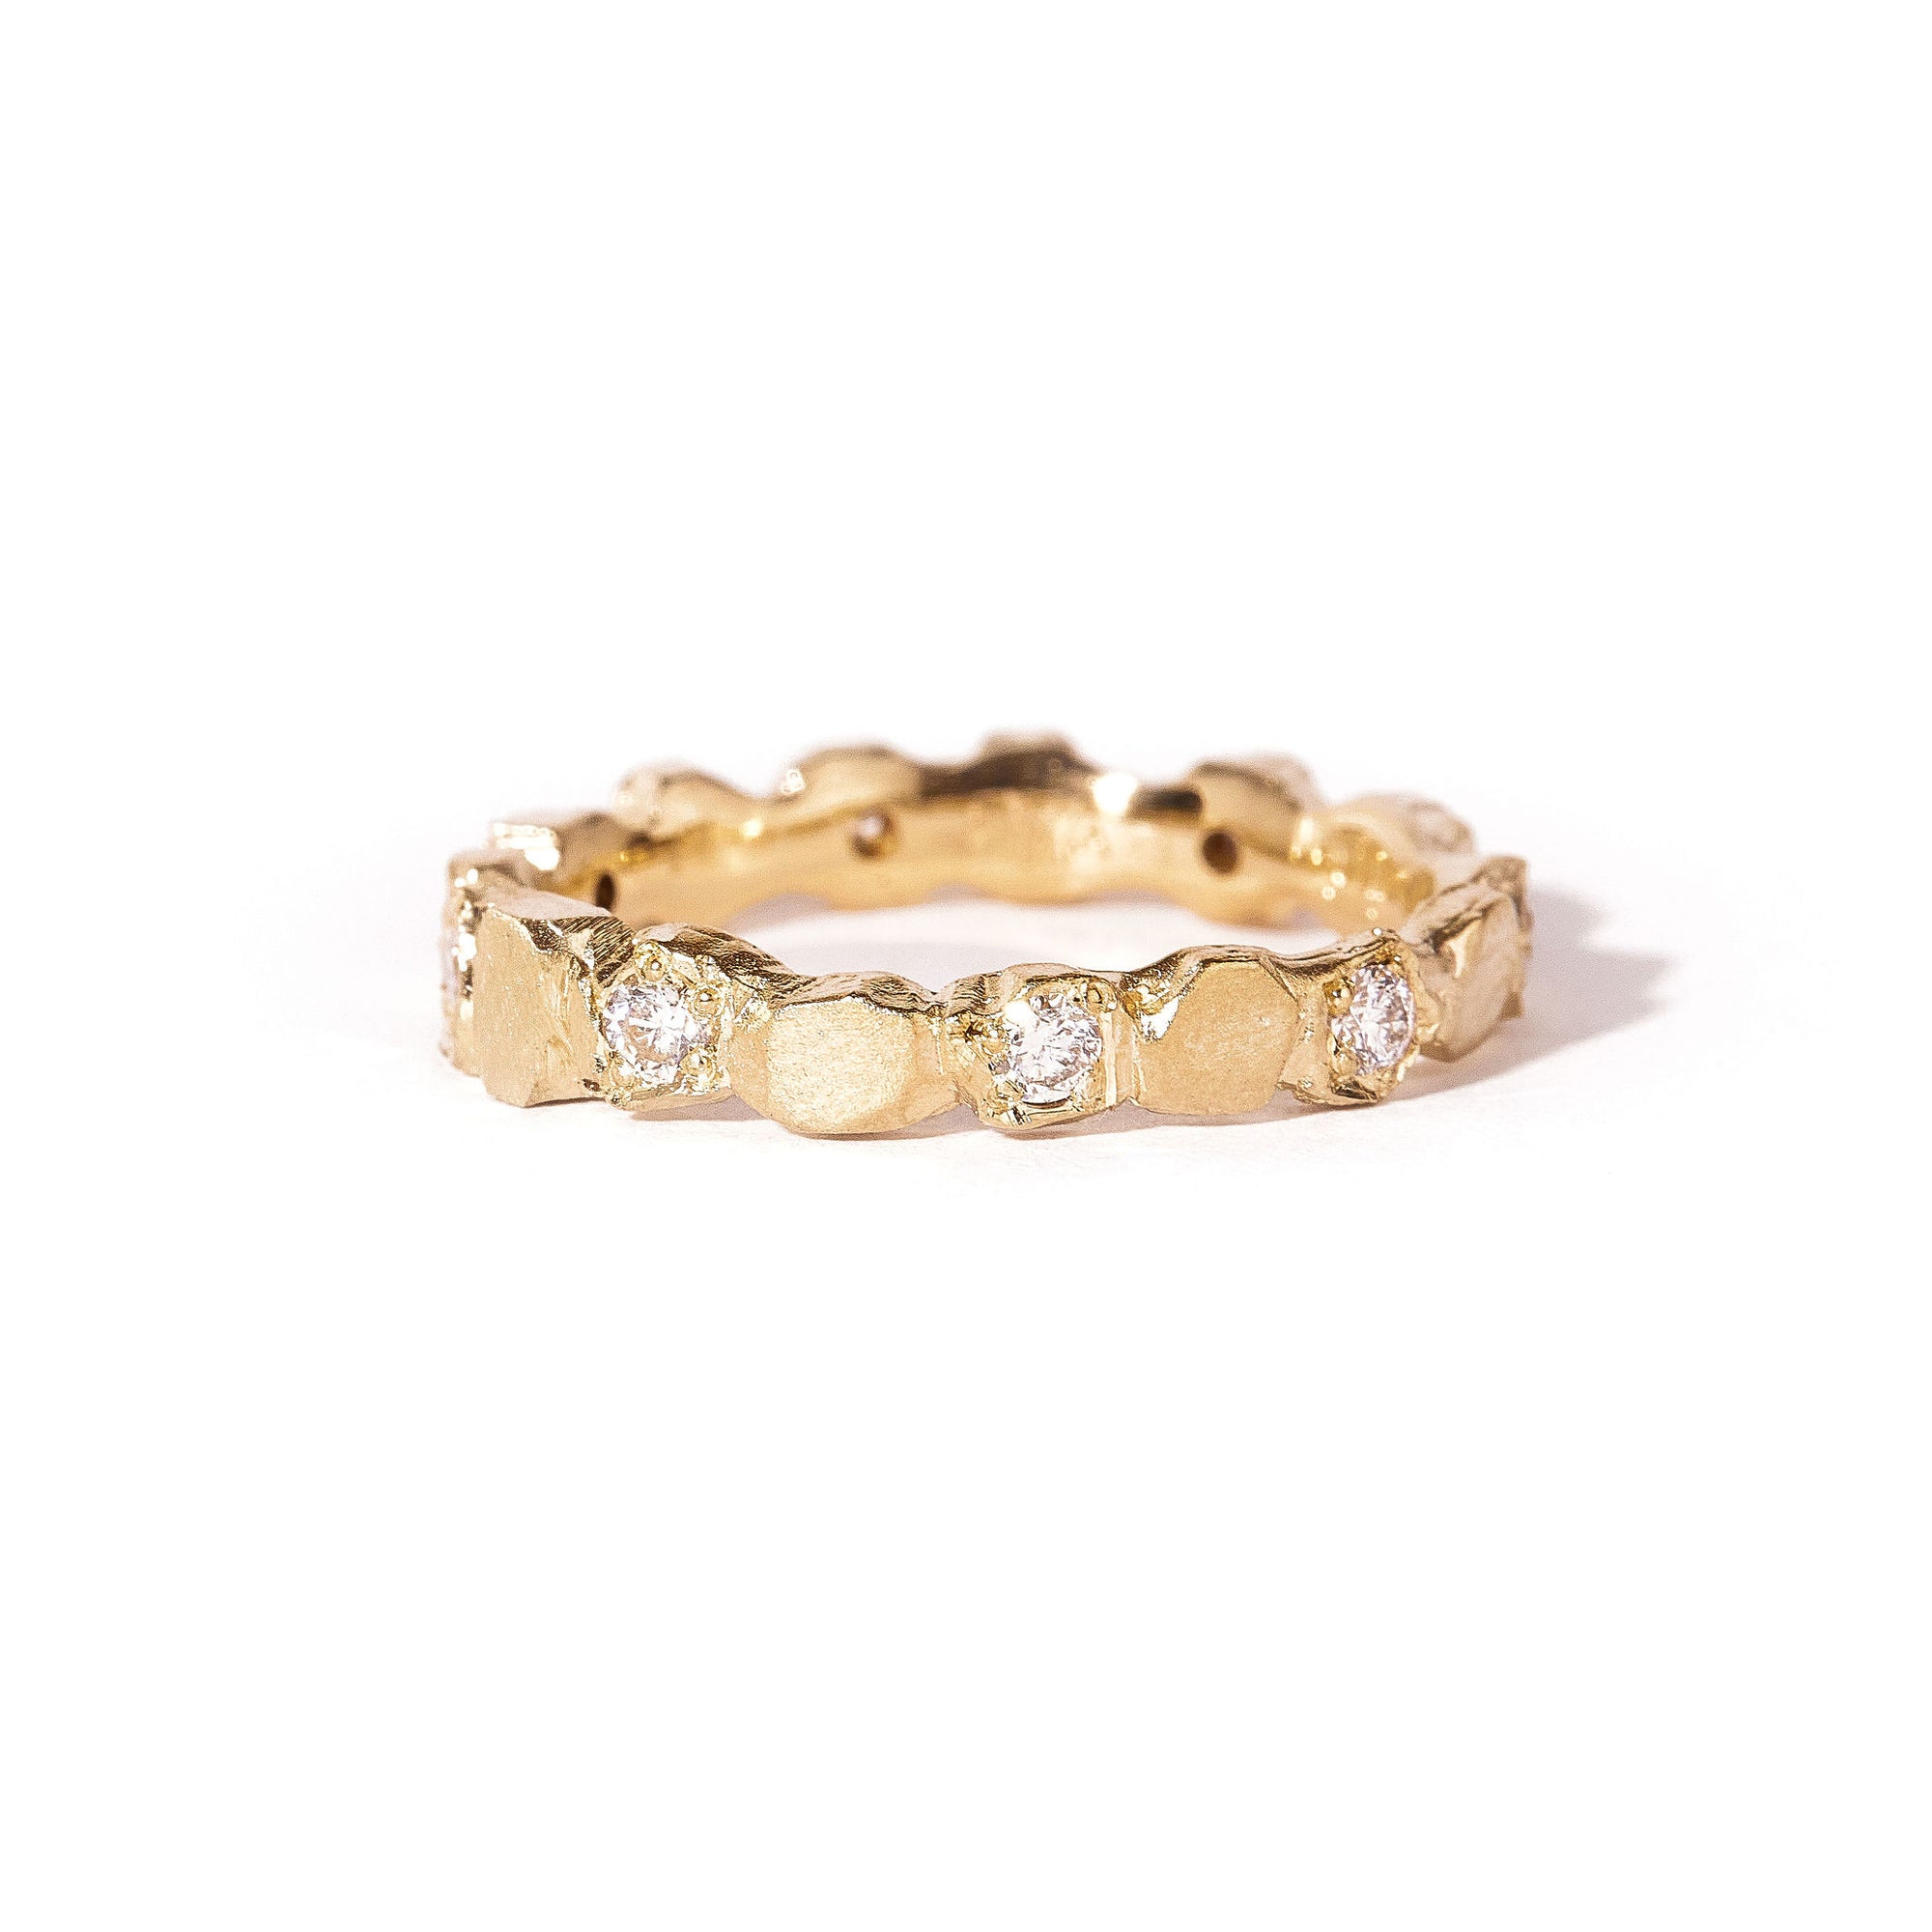 7 Stone Diamond Handcrafted Ring in 9ct Yellow Gold